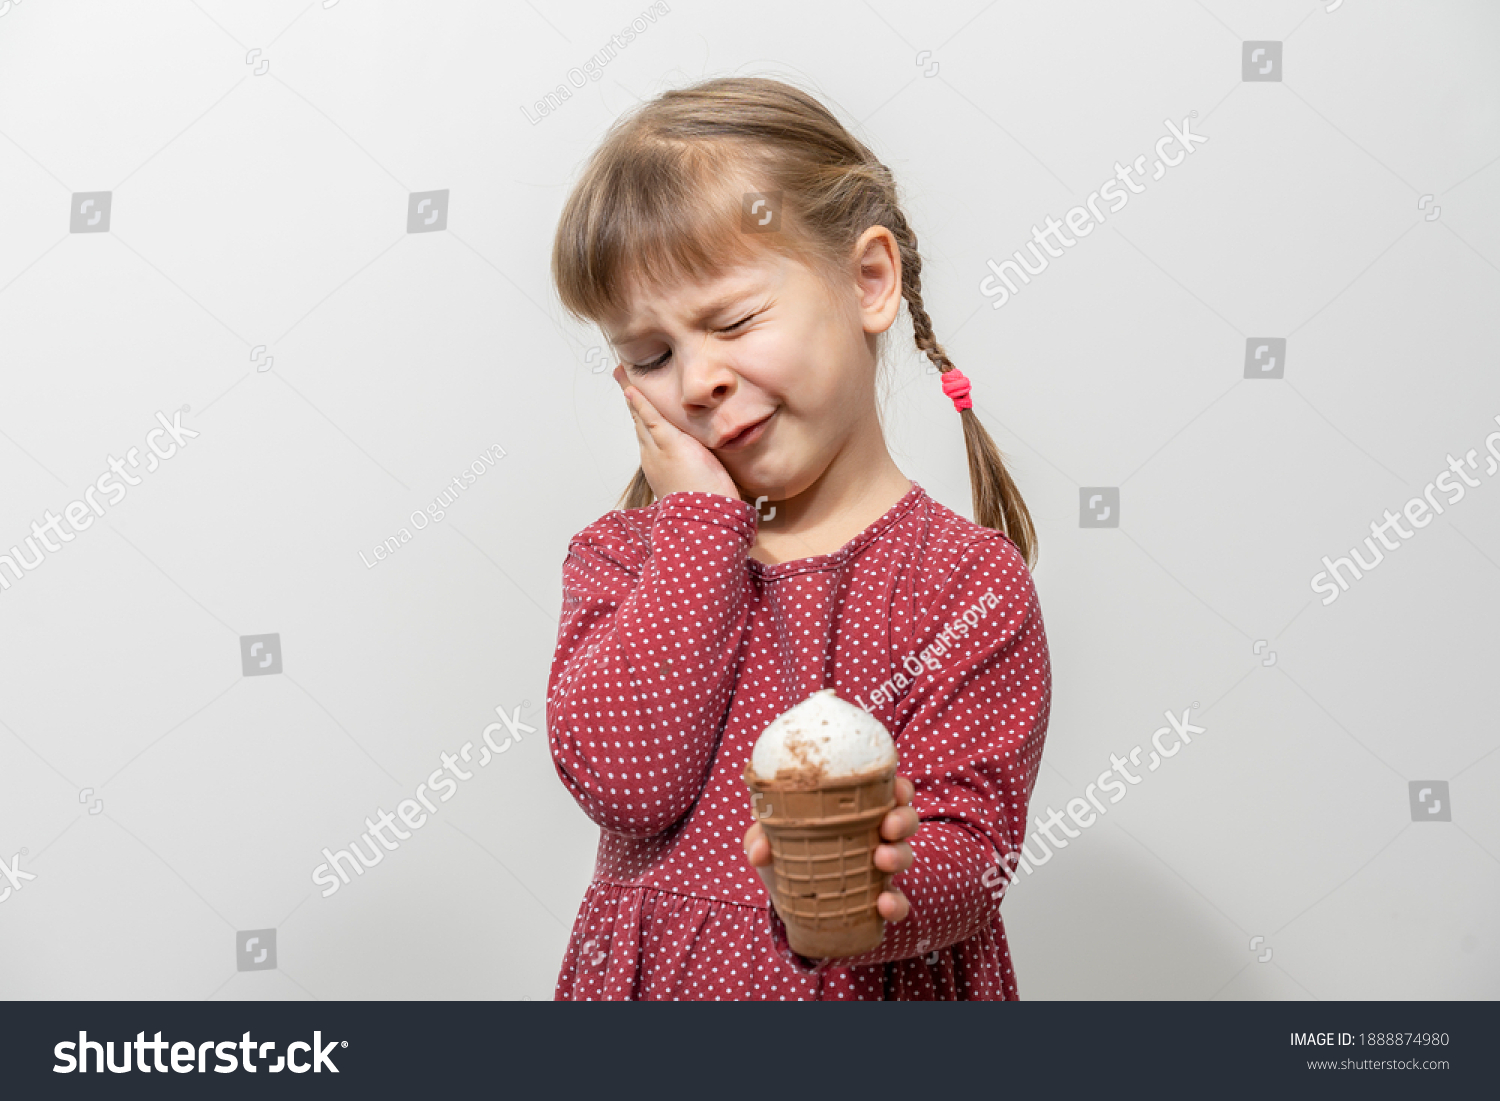 child has a toothache while eating ice cream. sensitivity of teeth to cold #1888874980